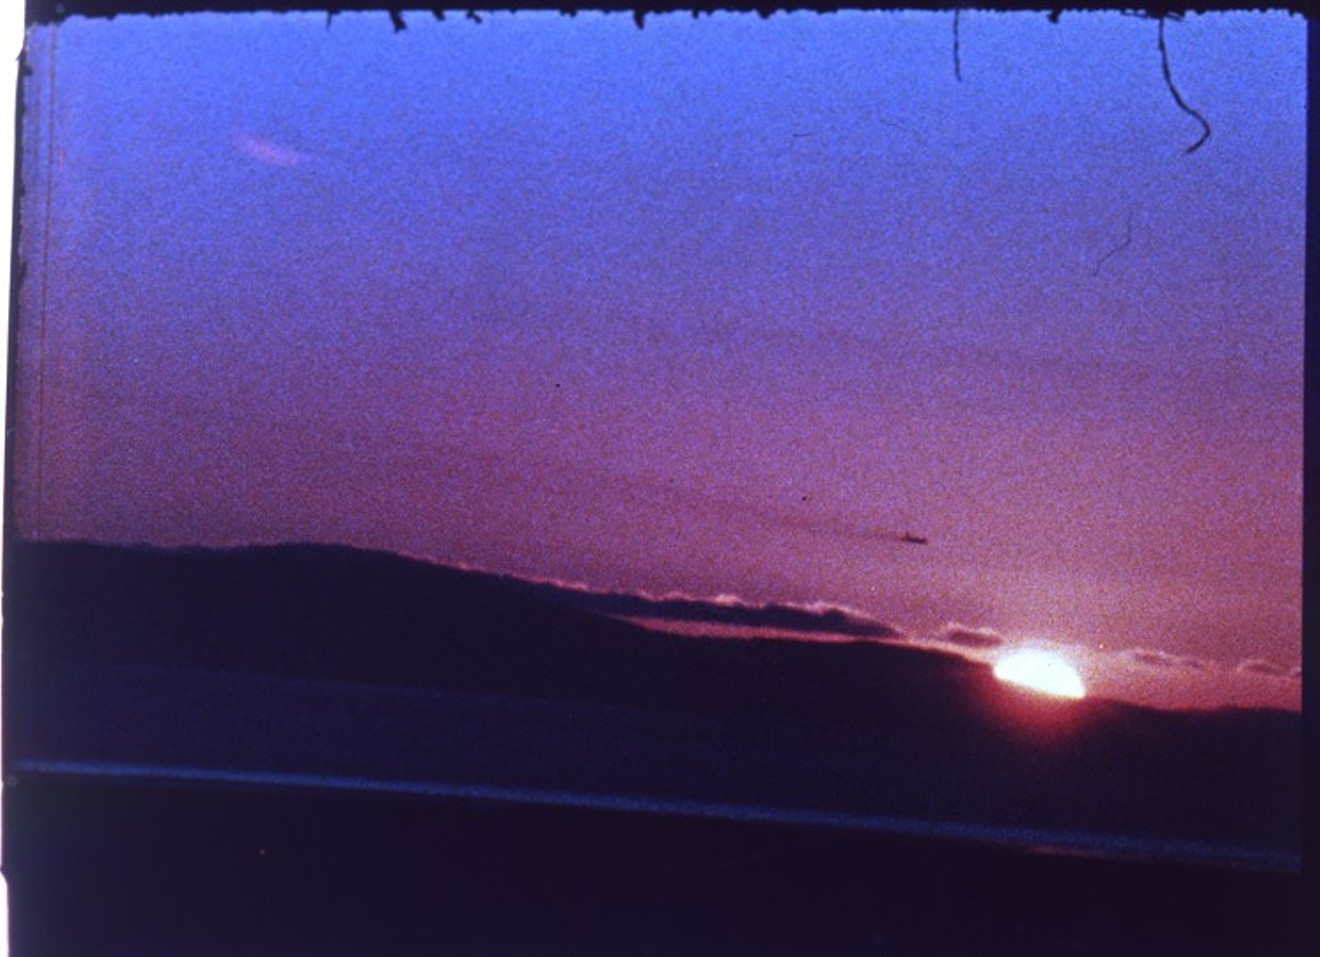 Film still from Andy Warhol, Sunset, 1967 — which I'd rather look at than people taking selfies.